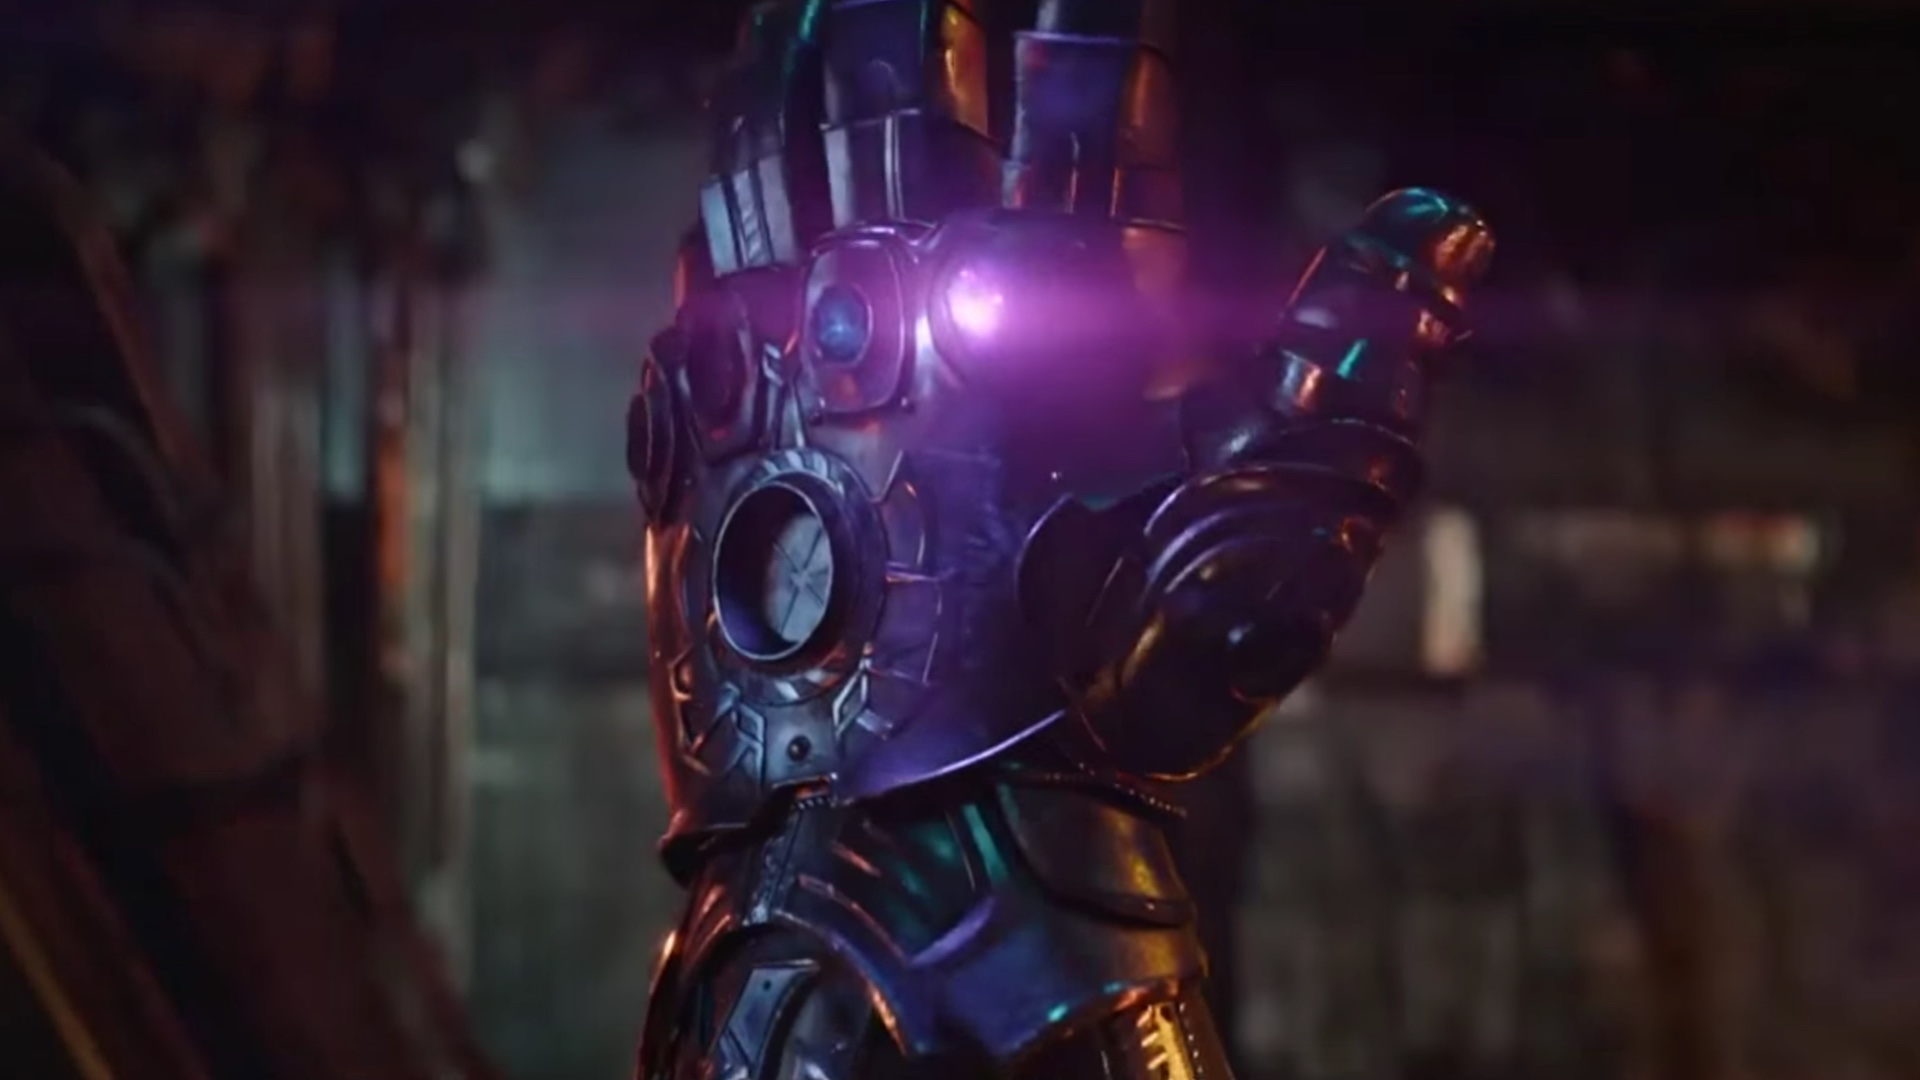 All Answers to This Trivia Quiz Are Numbers – Can You Get at Least 15/20? infinity stone gauntlet